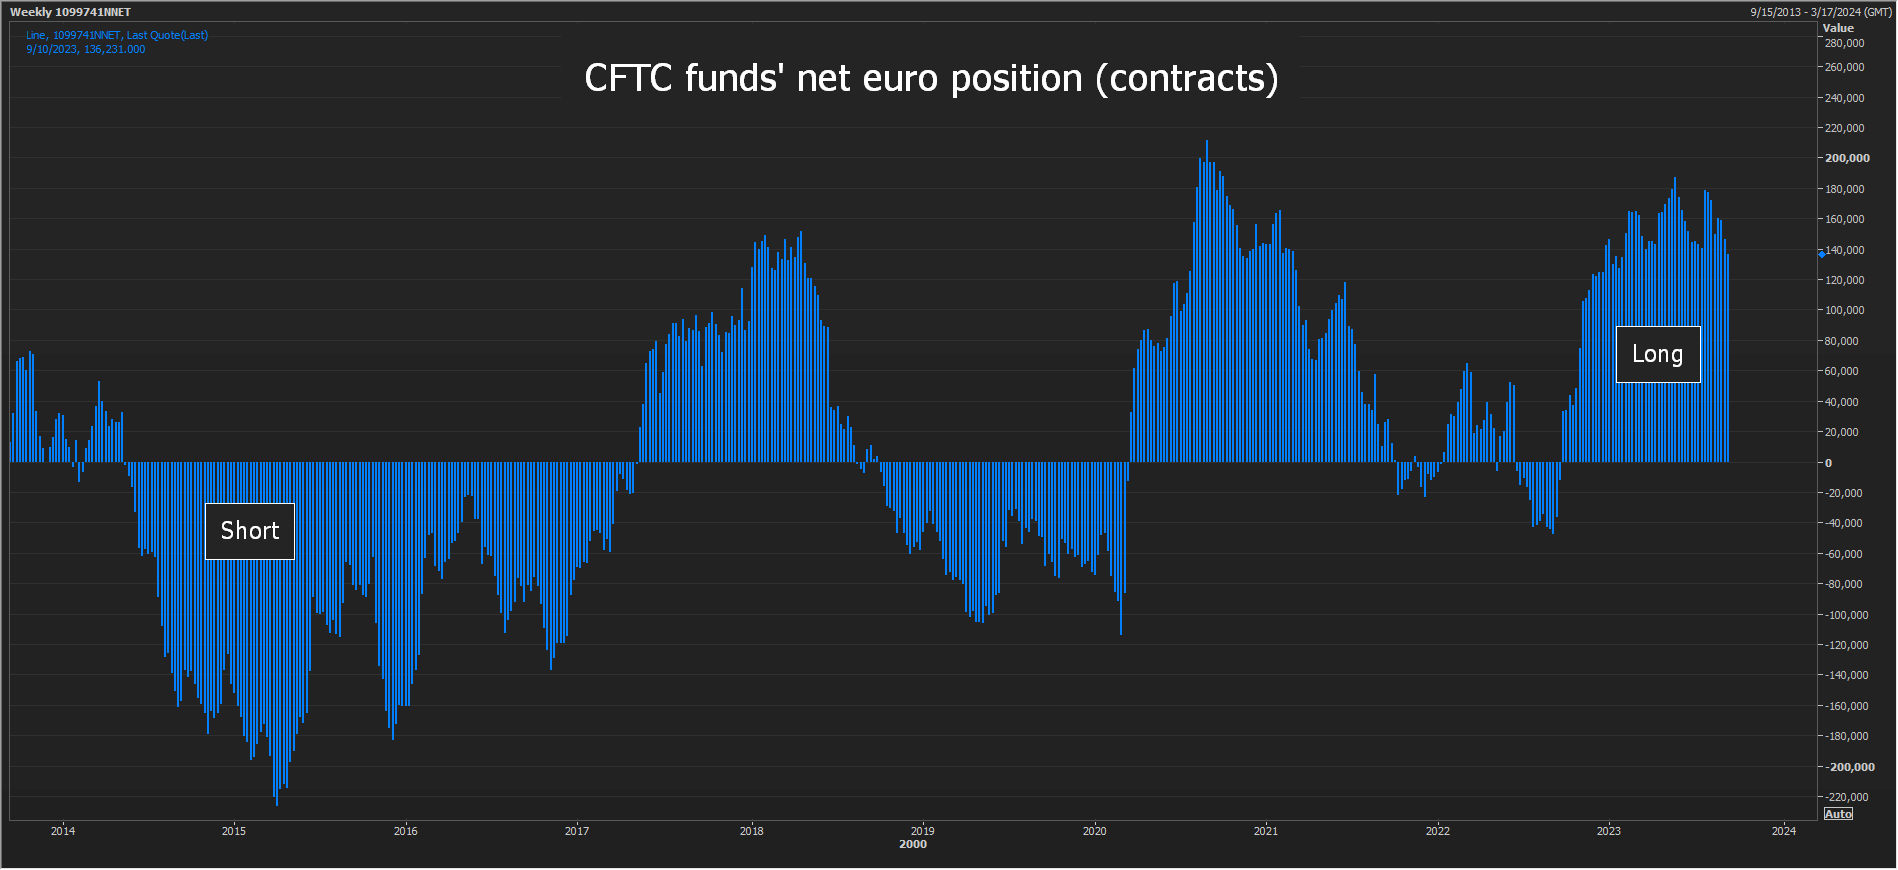 CFTC funds' euro position - contracts